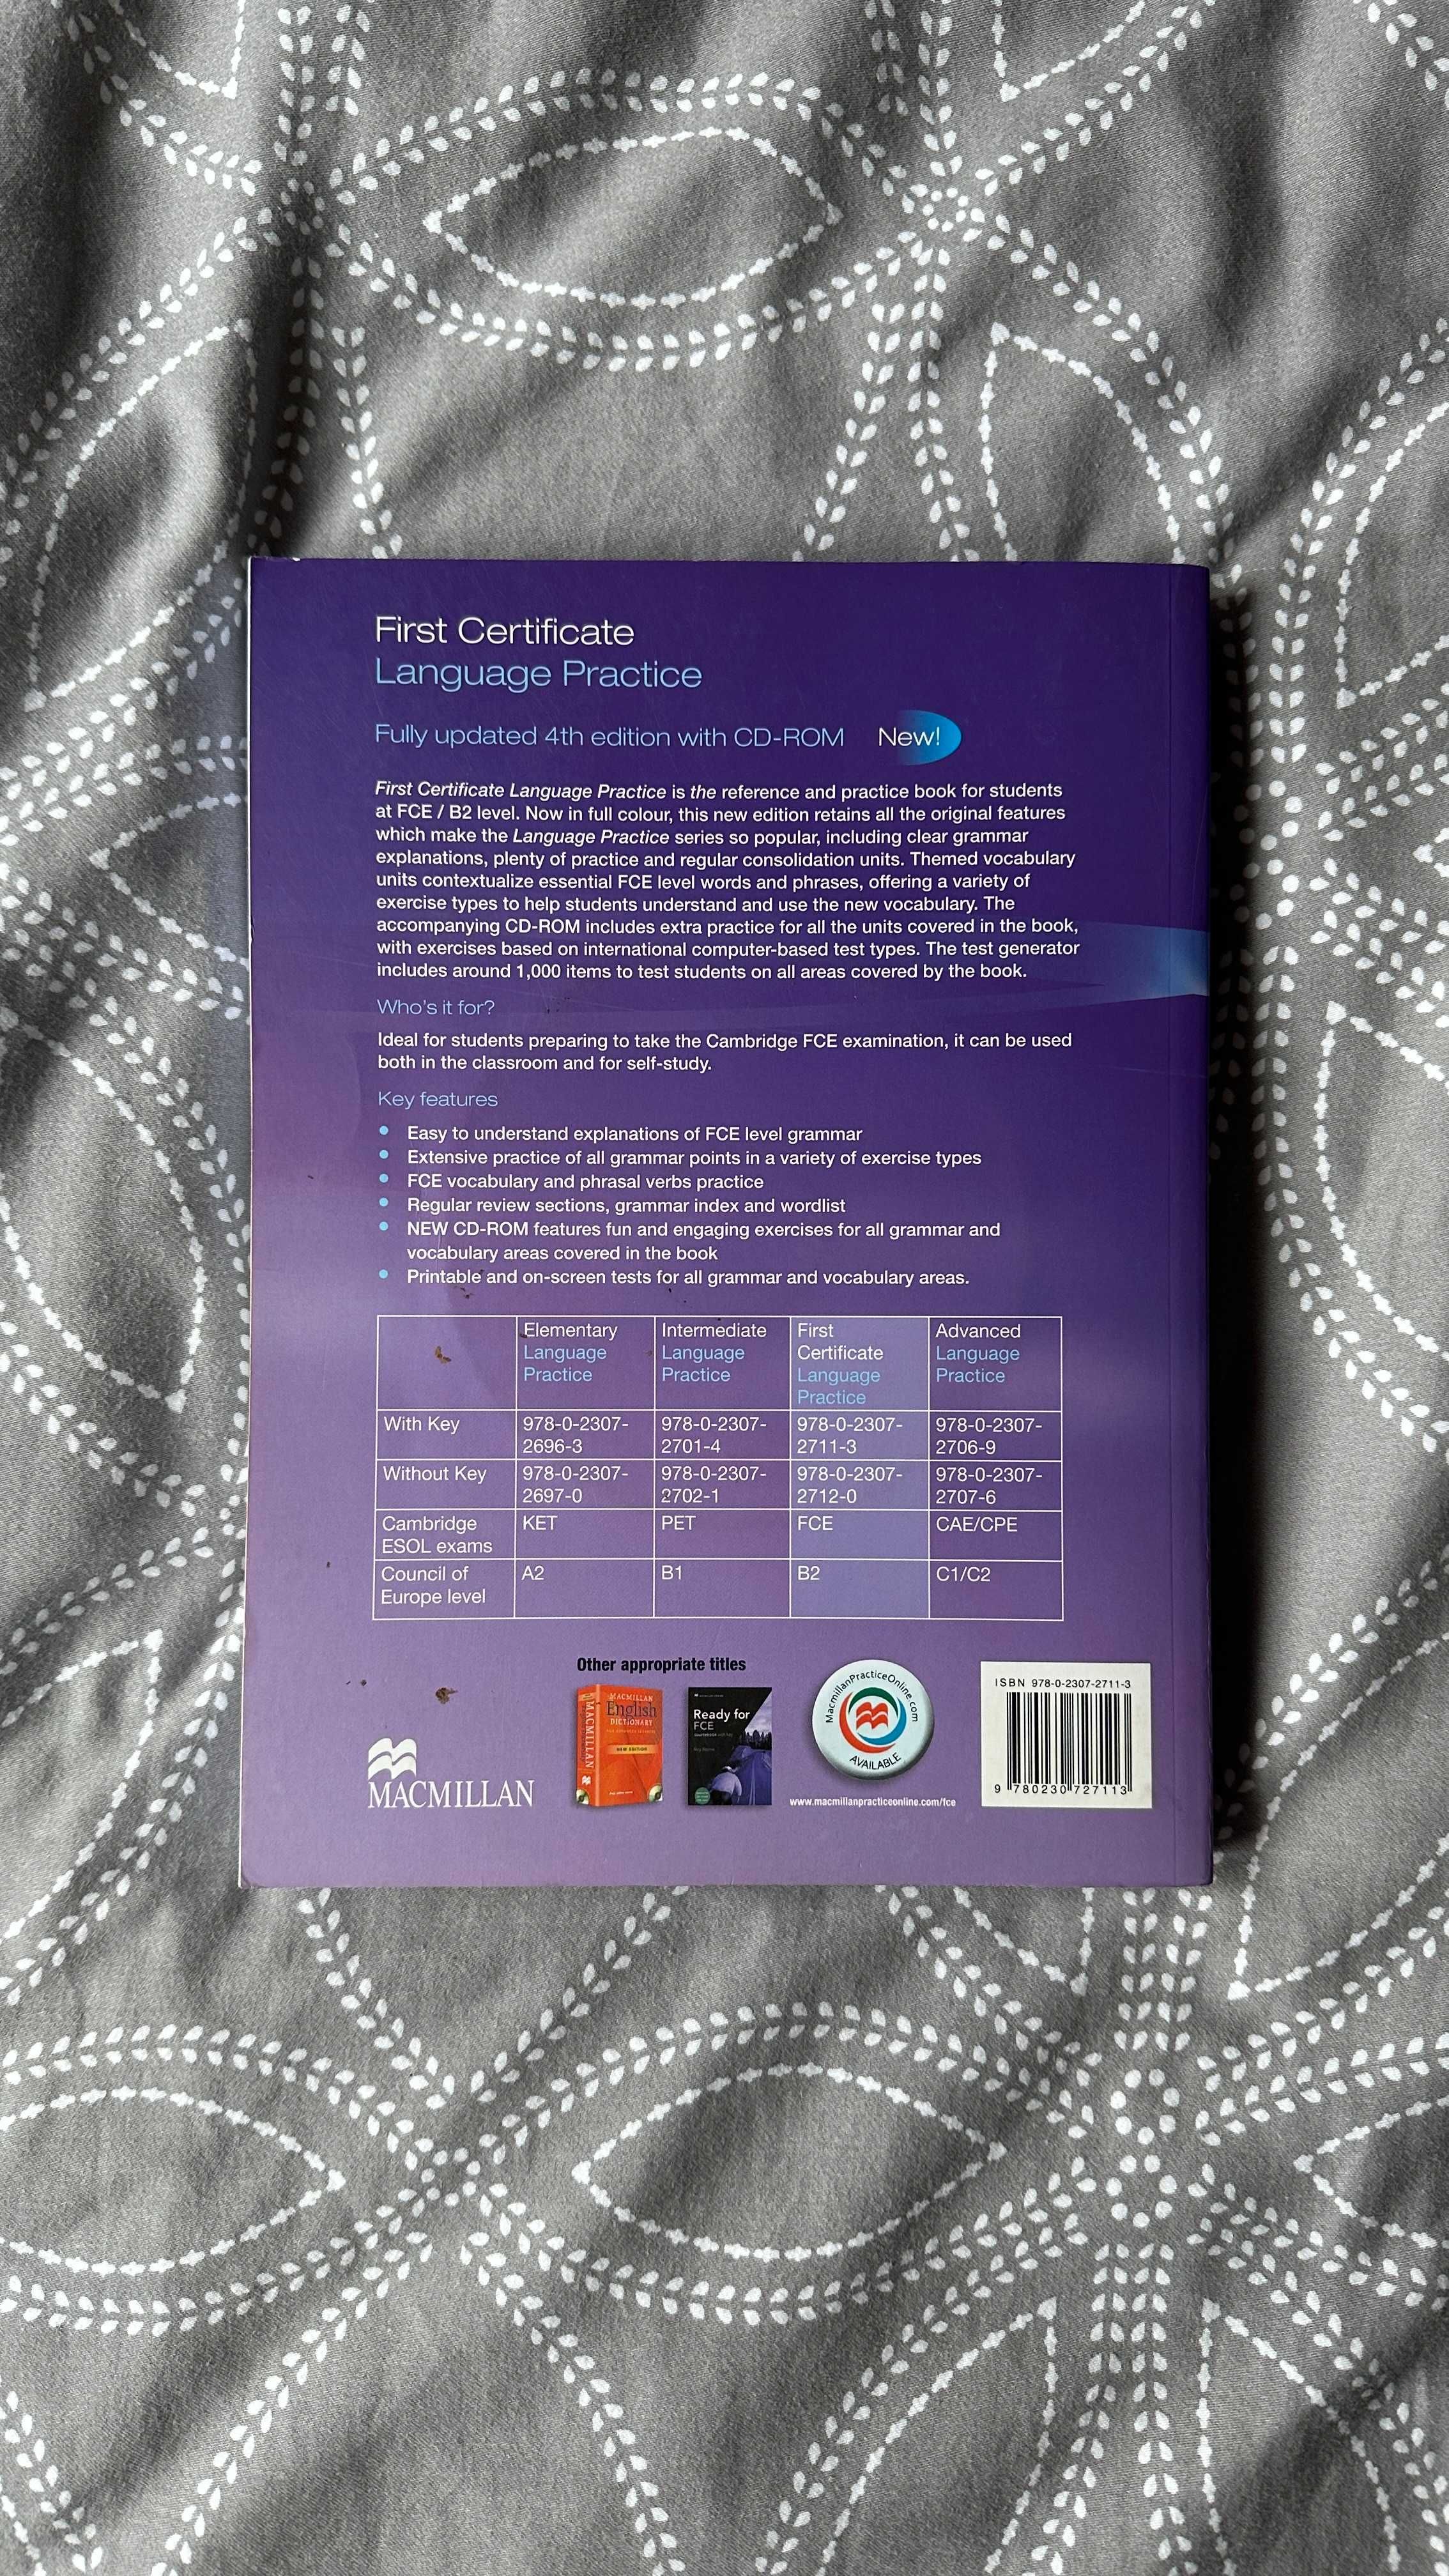 First Certificate Language Practice | Michael Vince | 4th Edition | CD